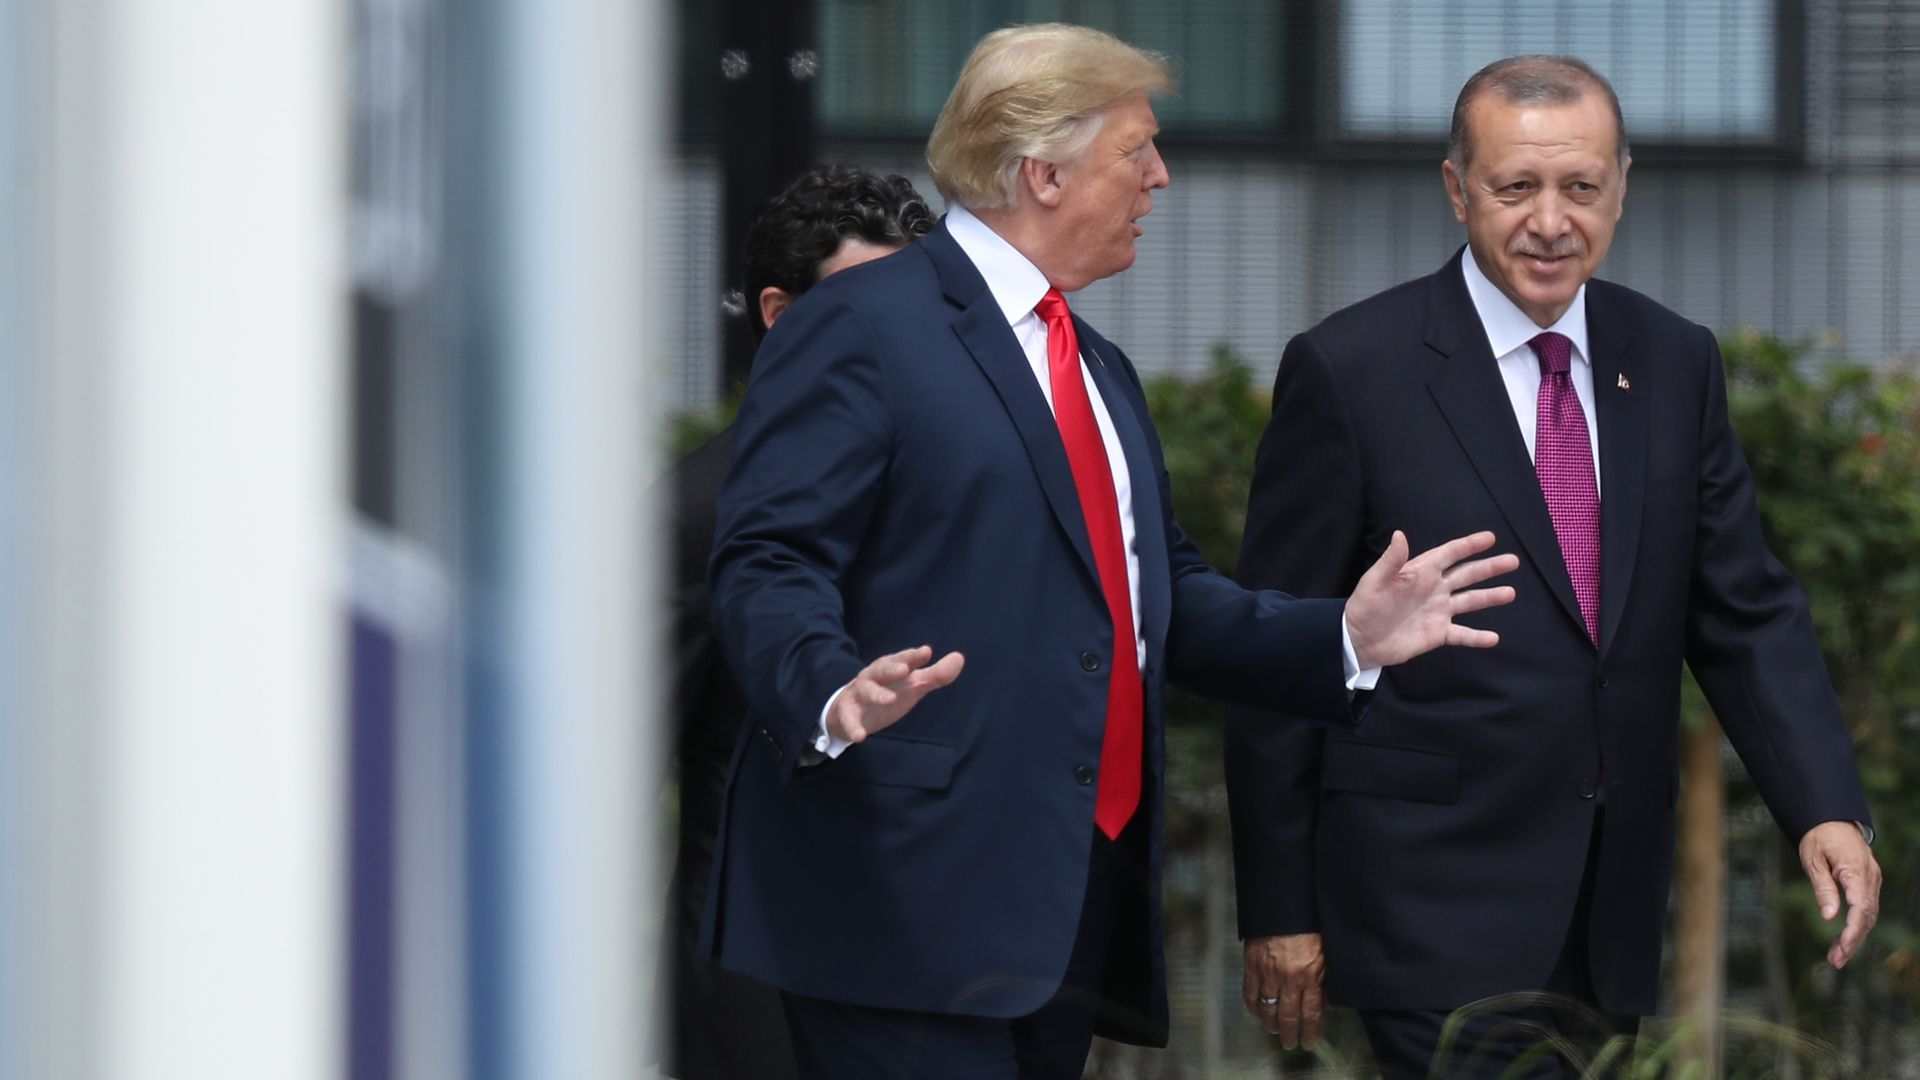 In this image, Trump and Erdogan walk together outside while talking, both wearing suits.